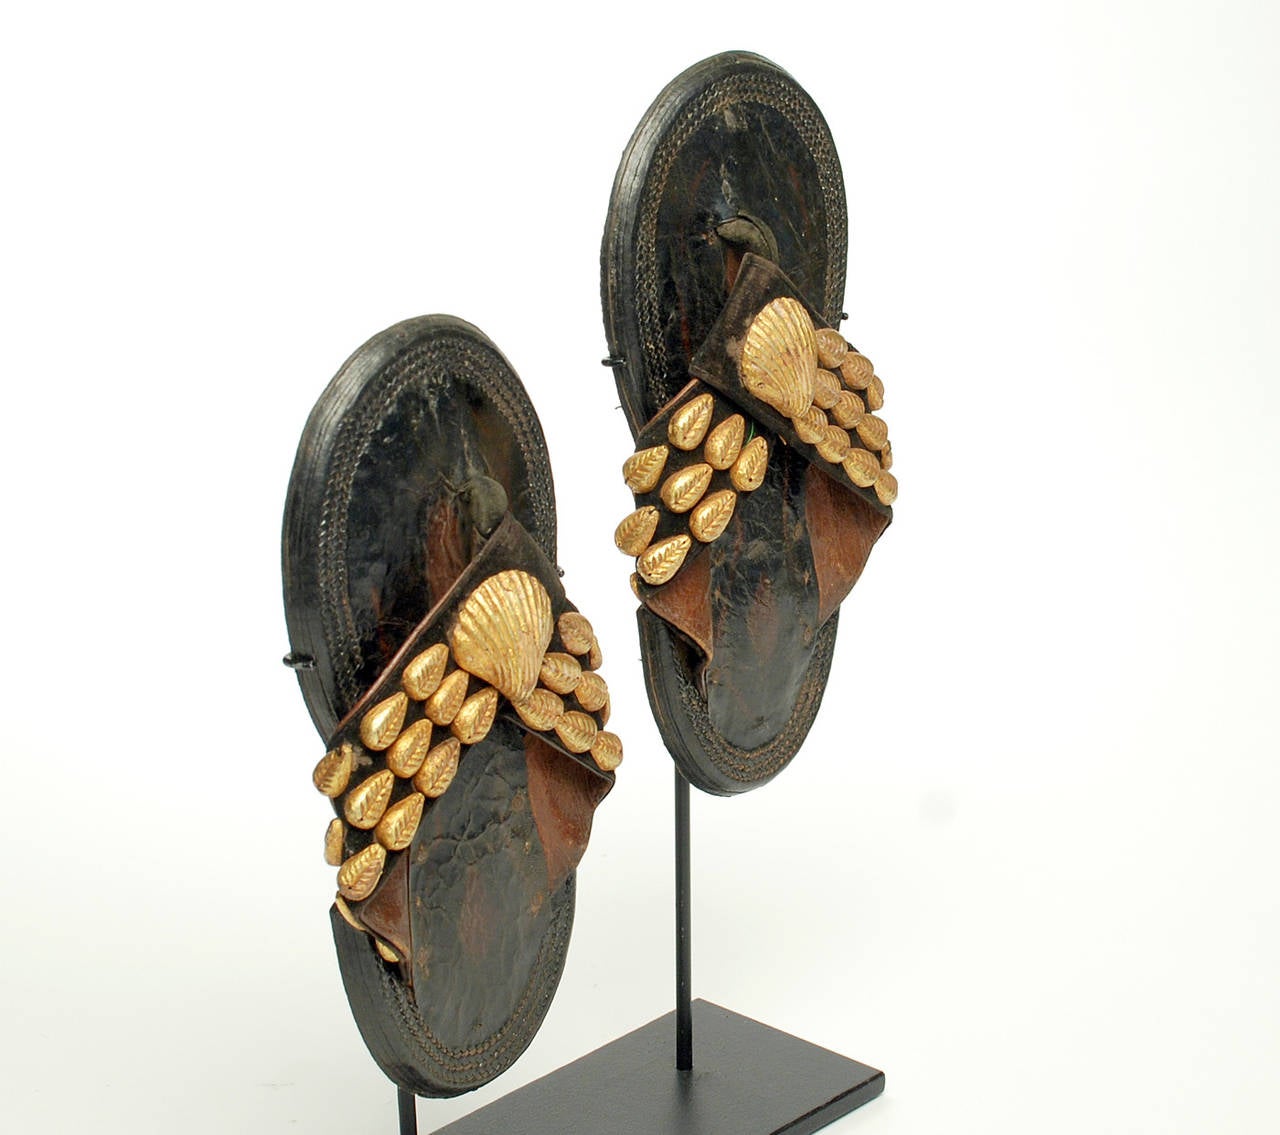 Rare Early 20th Century Royal Ashanti Crown and Sandals For Sale 1